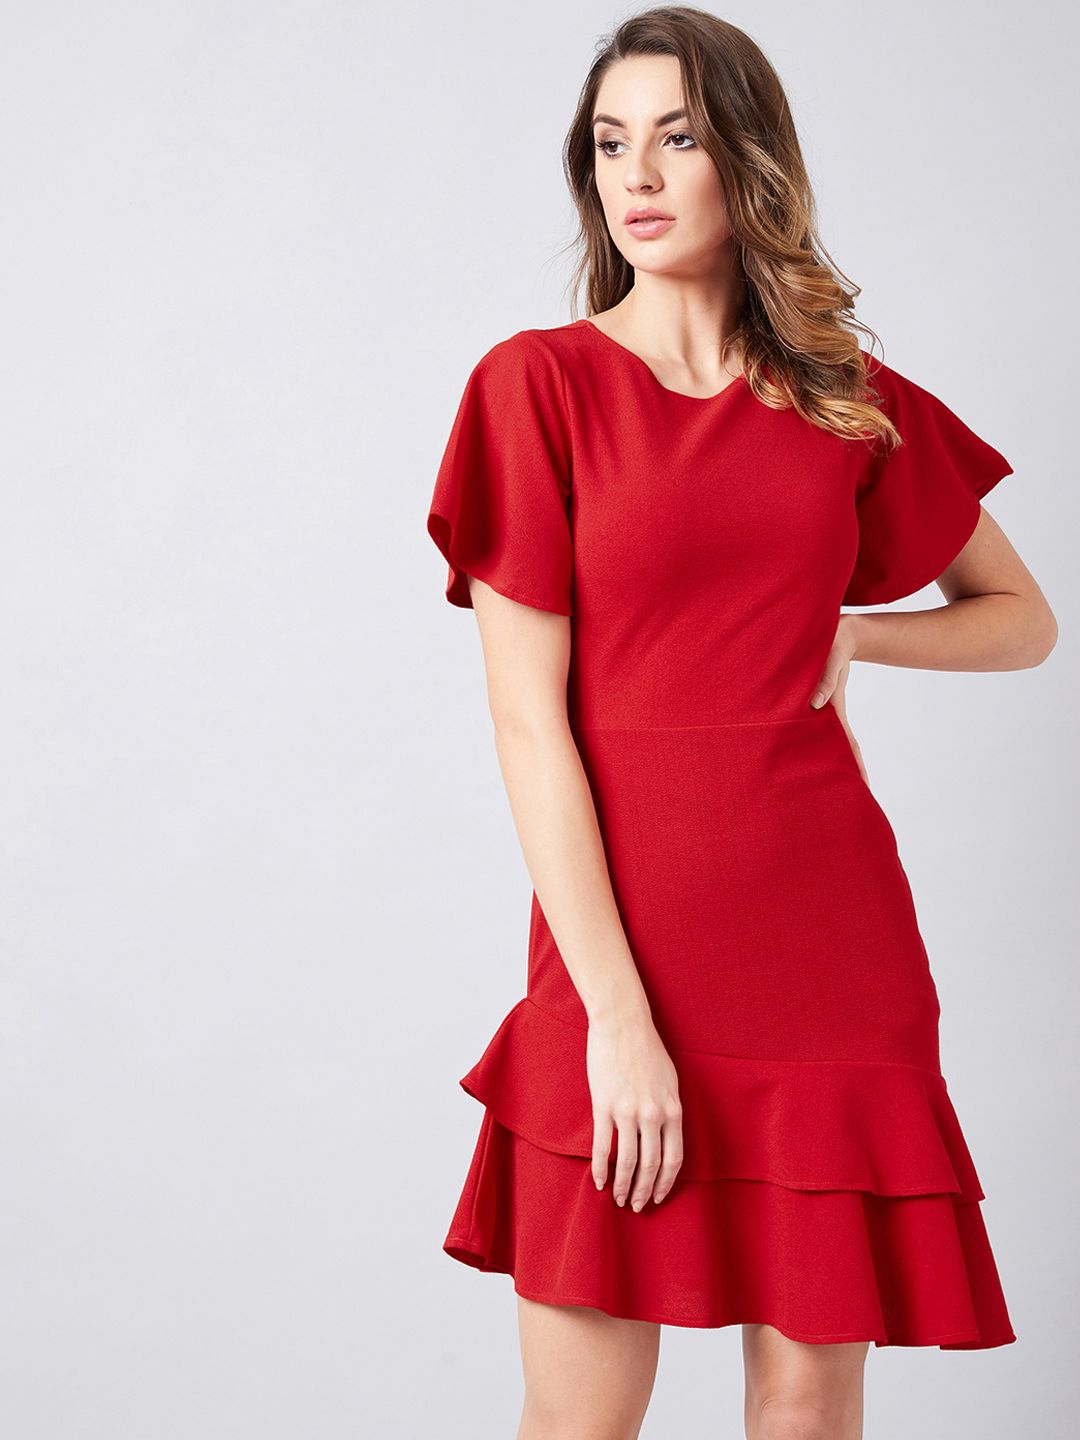 Athena Women Red Solid Sheath Dress Price in India